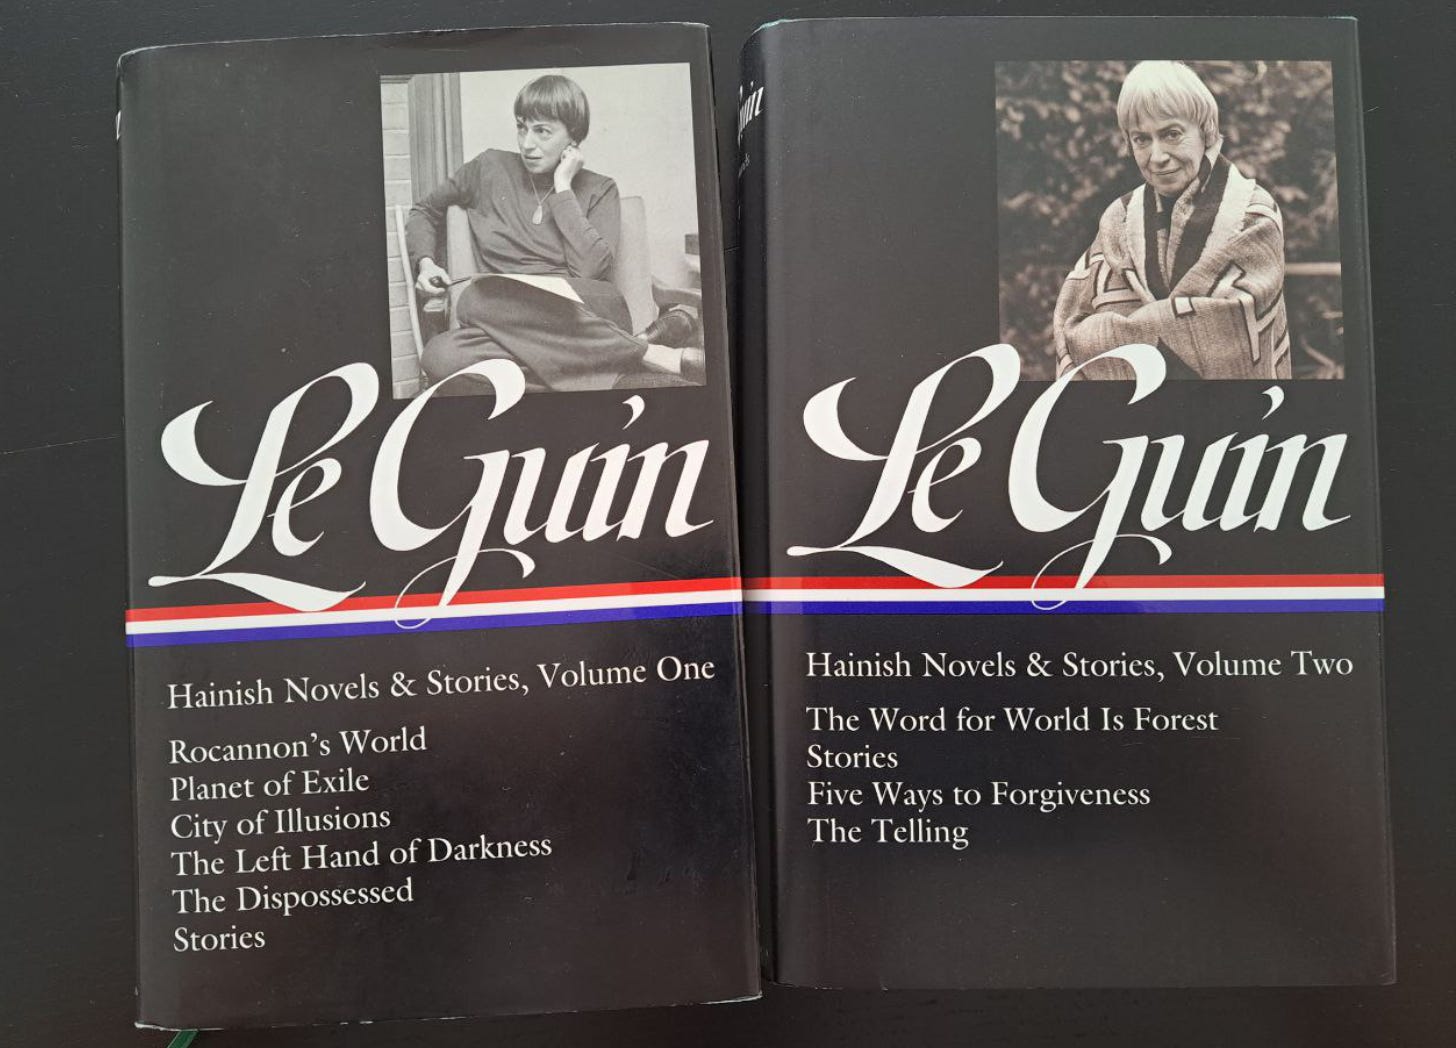 The two volume hardbacks collecting Le Guin’s Hainish Novels & Stories